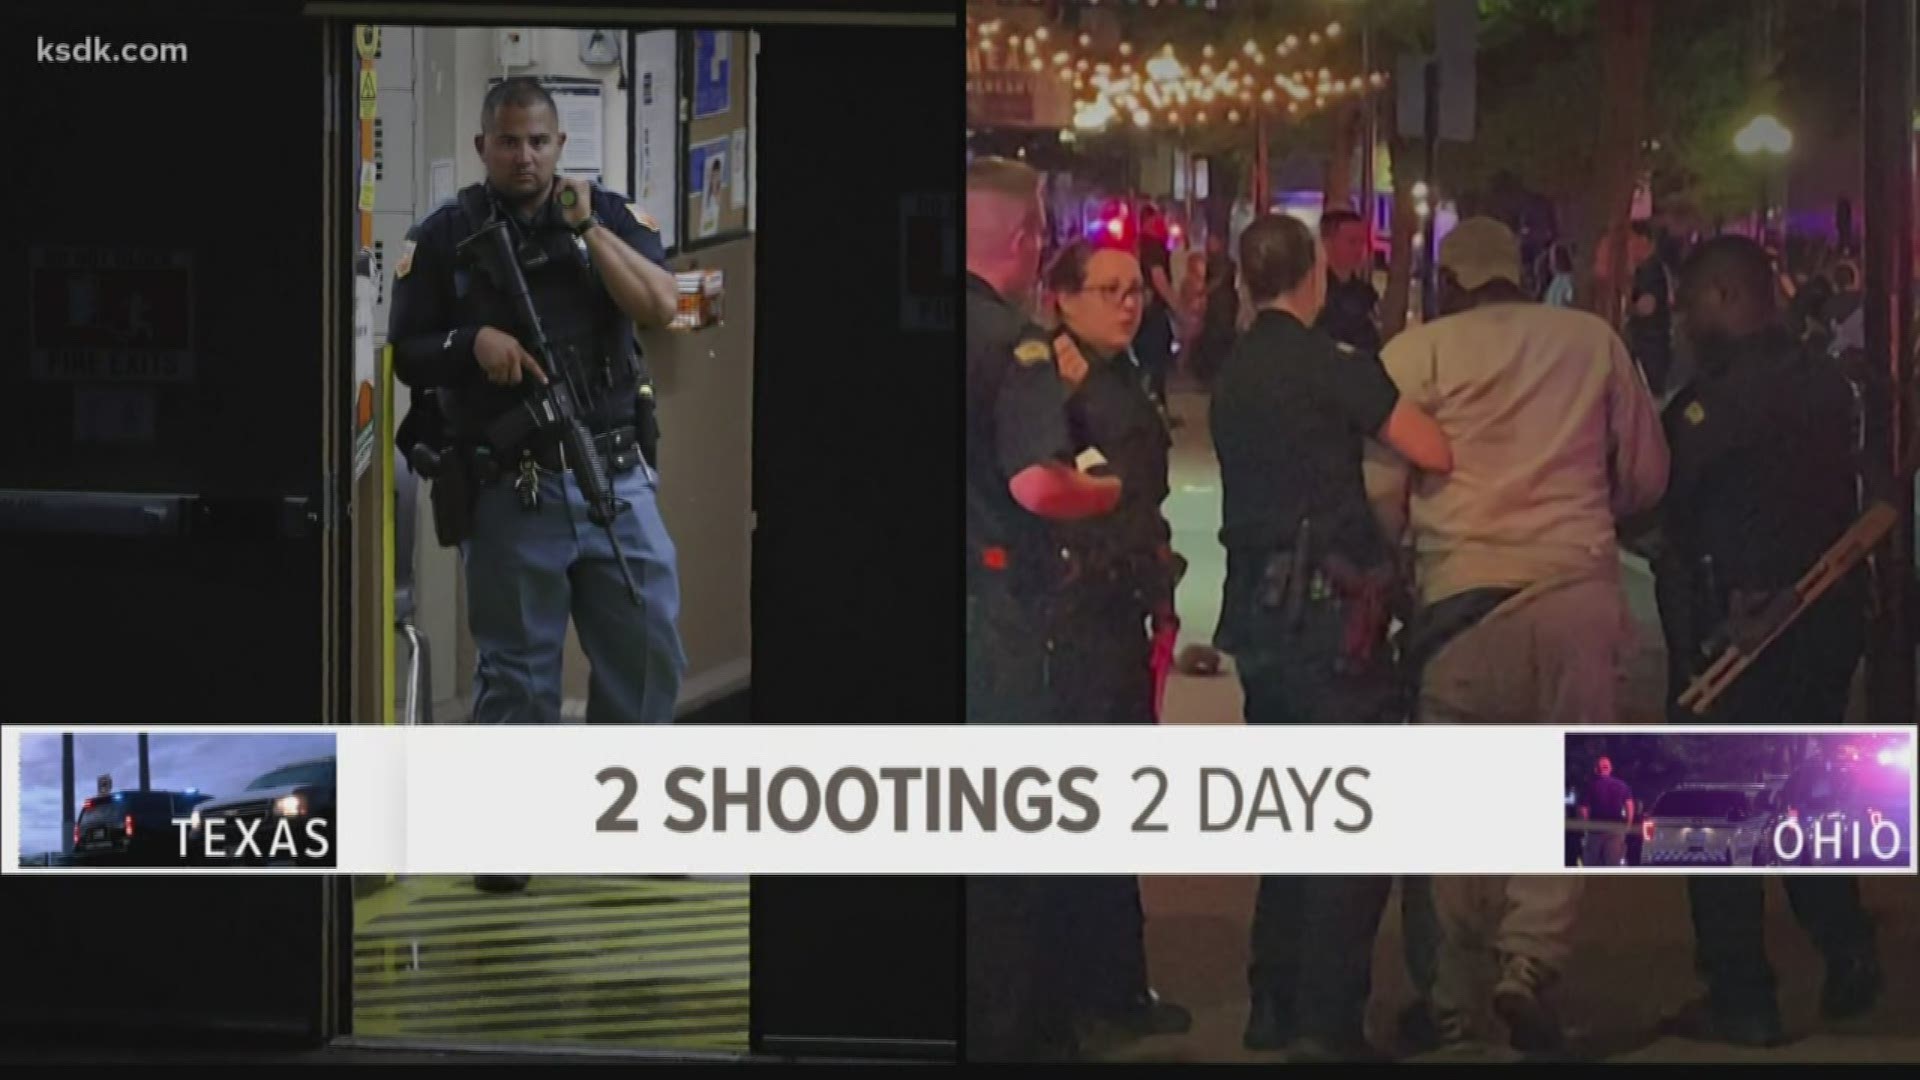 In less than 24 hours, 29 people were killed in two mass shooting incidents.